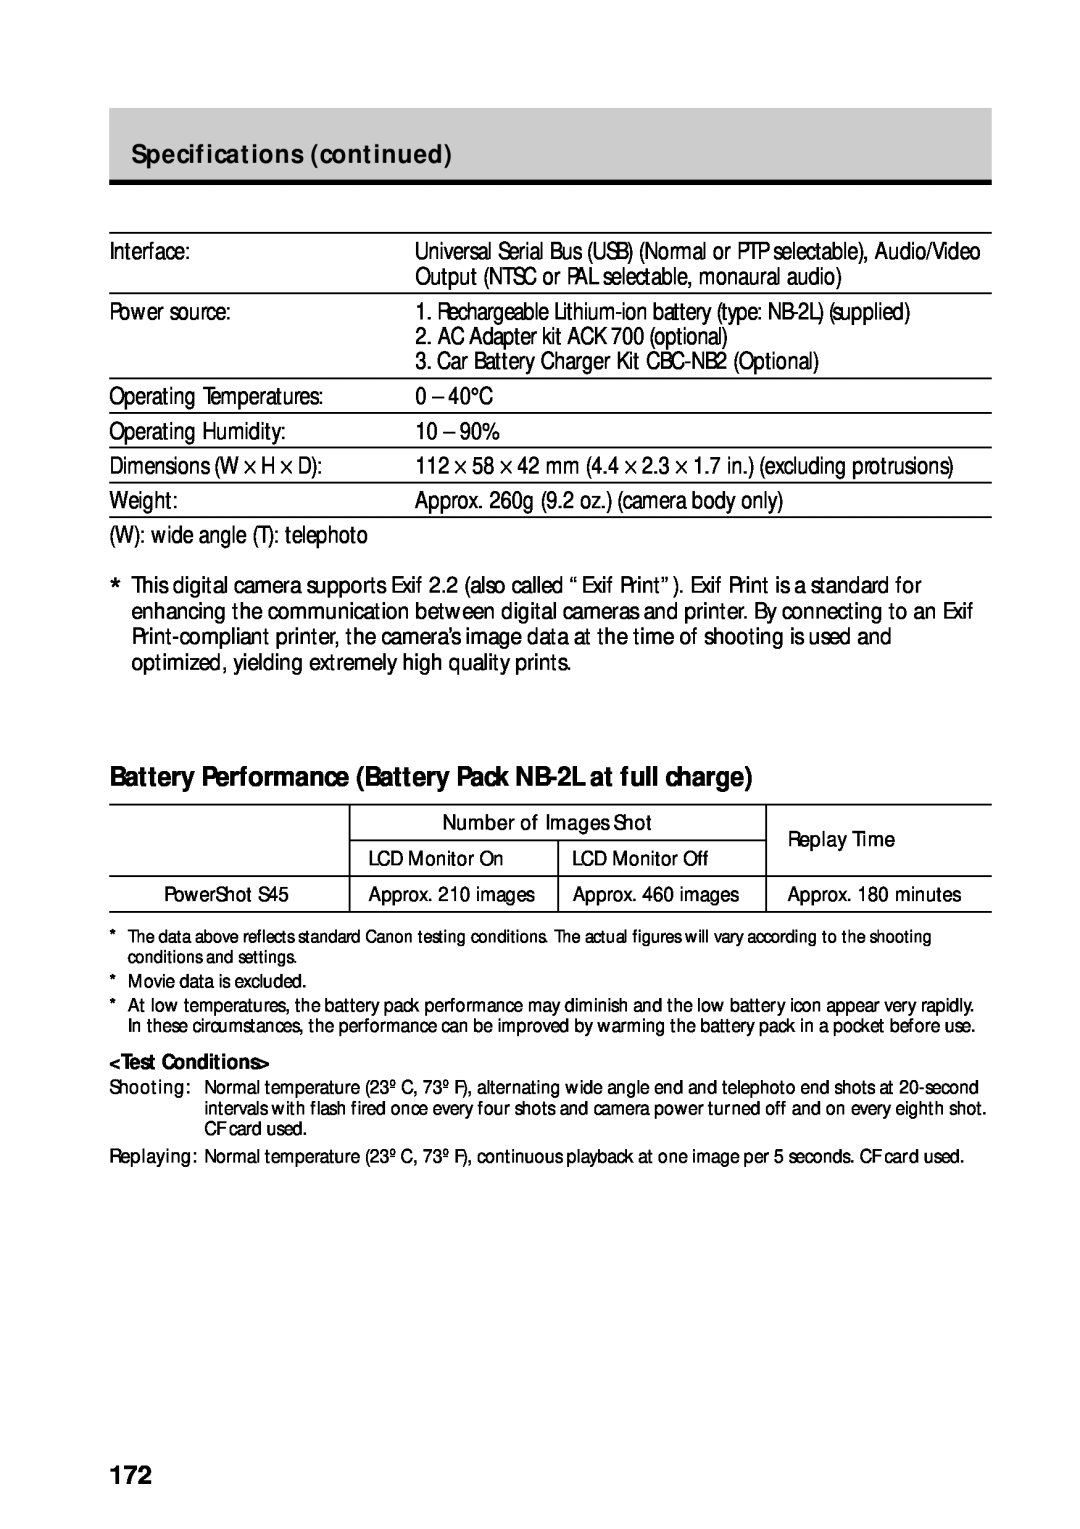 Canon PowerShot S45 manual Battery Performance Battery Pack NB-2L at full charge, Specifications continued 